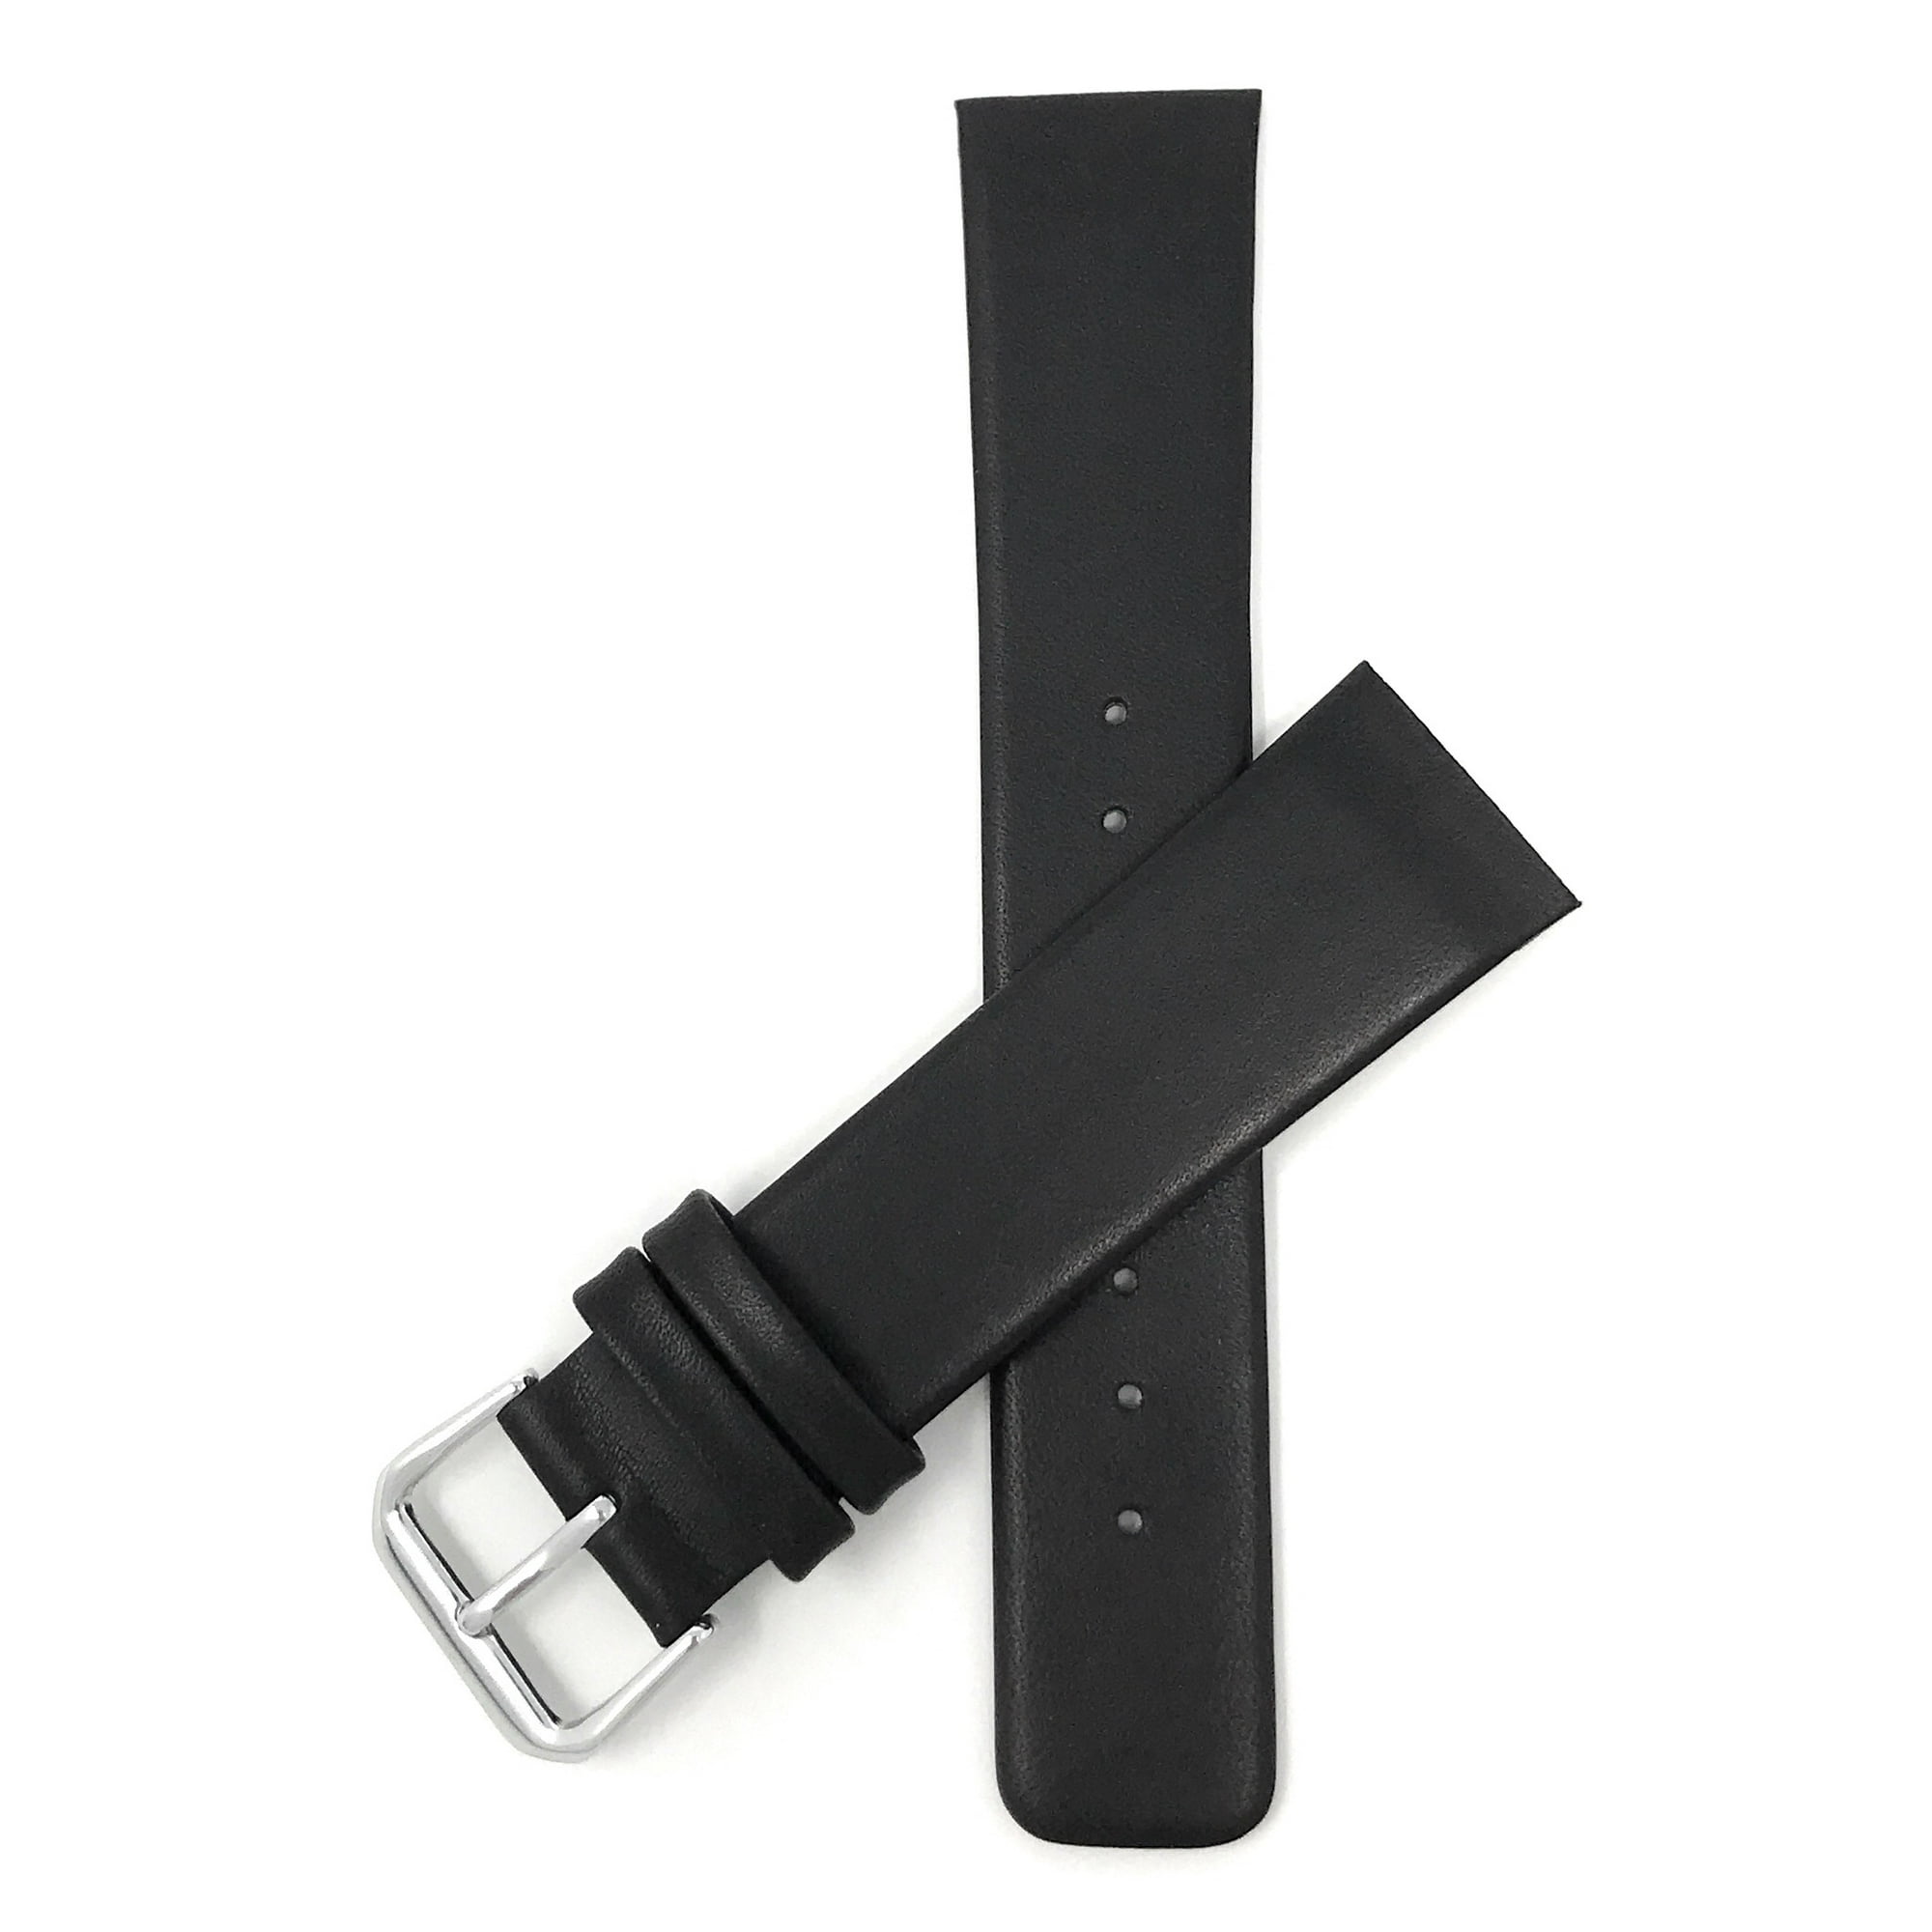 Skagen Watch Band Replacement Parts | Reviewmotors.co